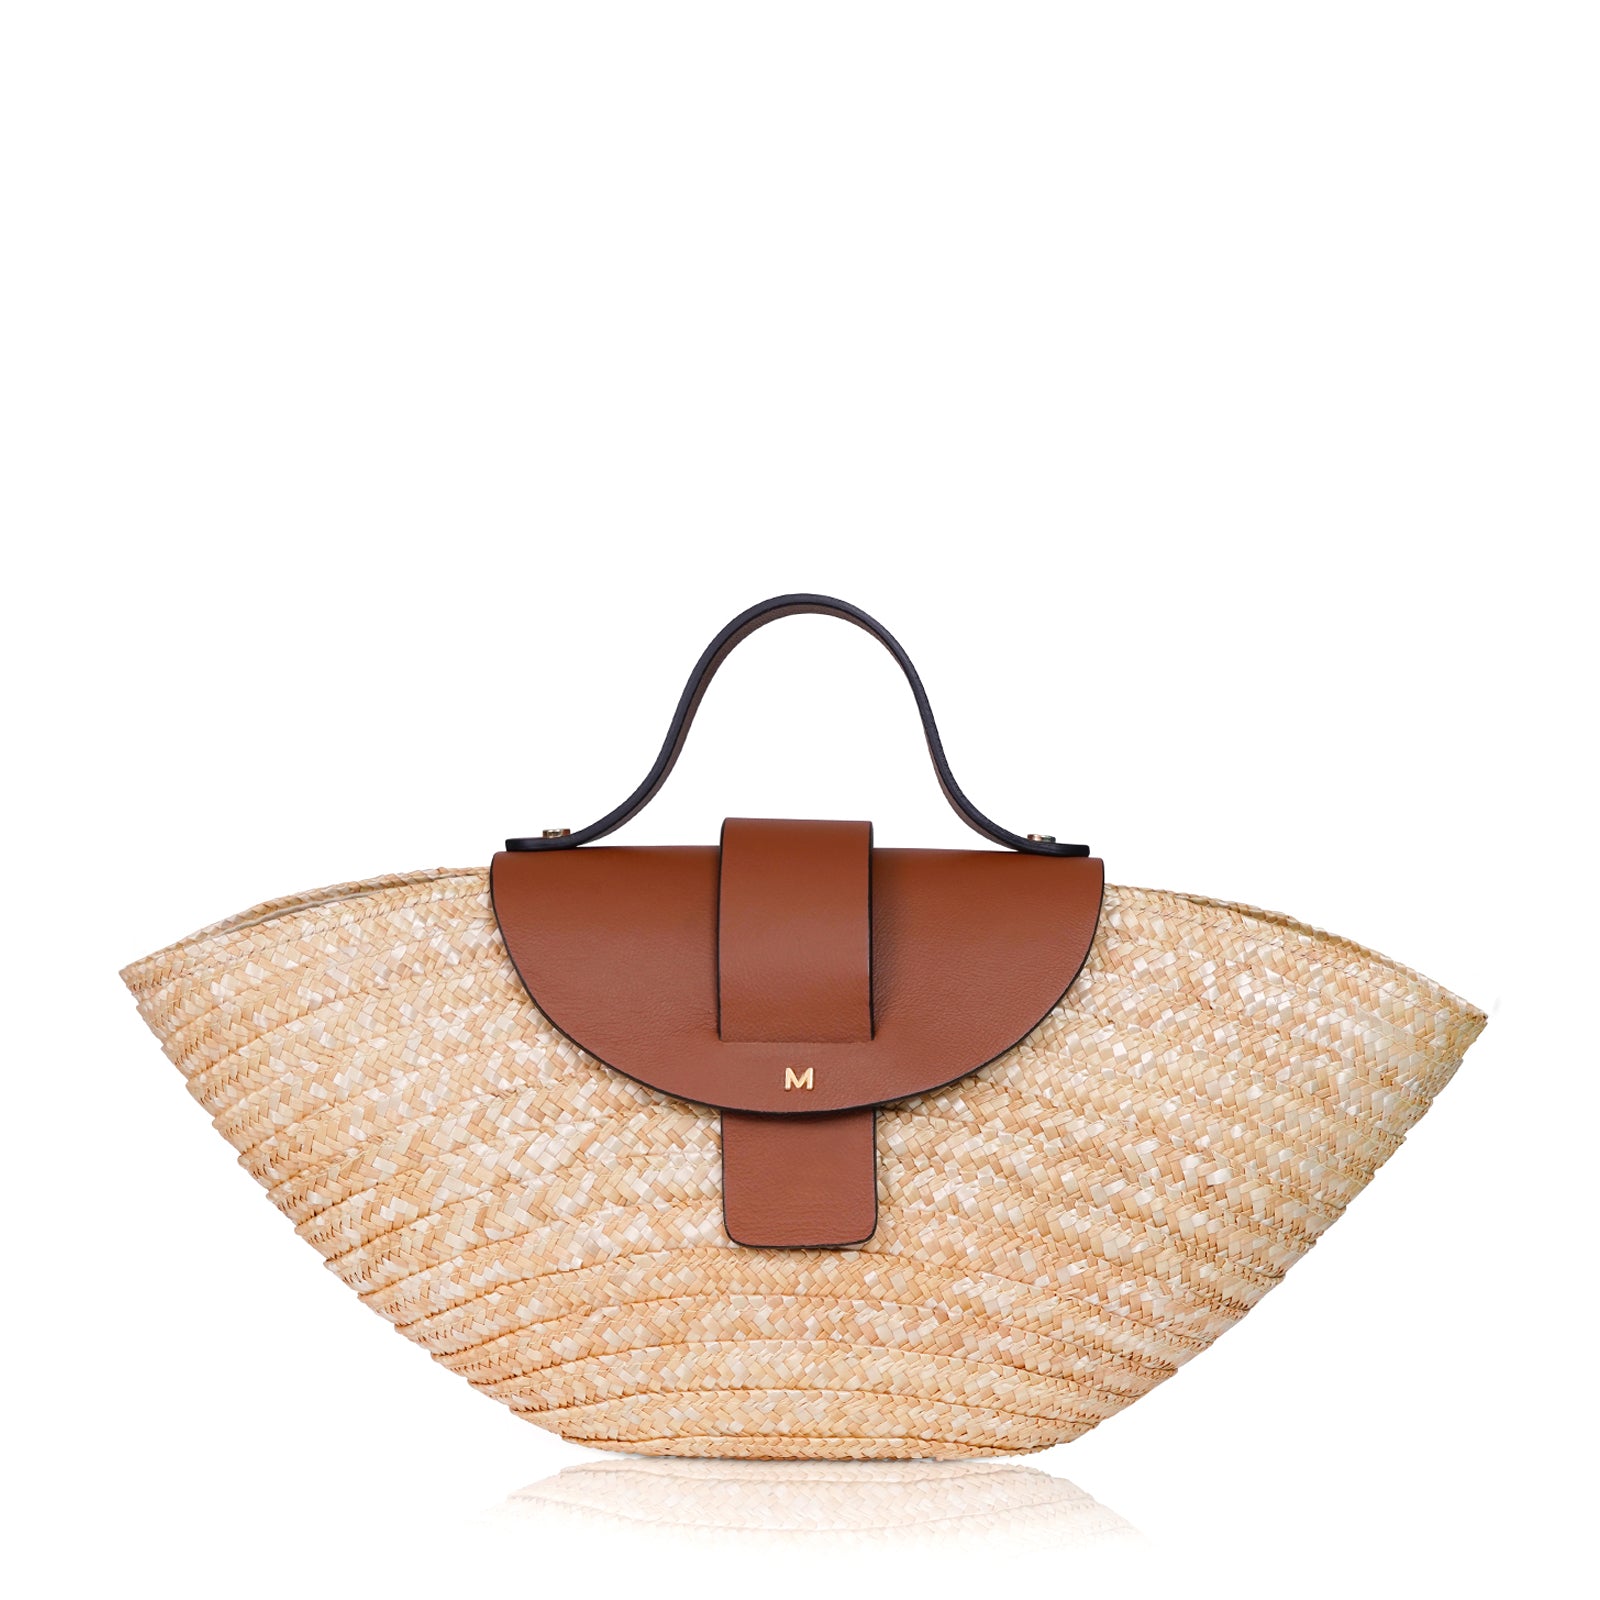 Straw Bag Long Flat Leather Handle with Detachable Inside